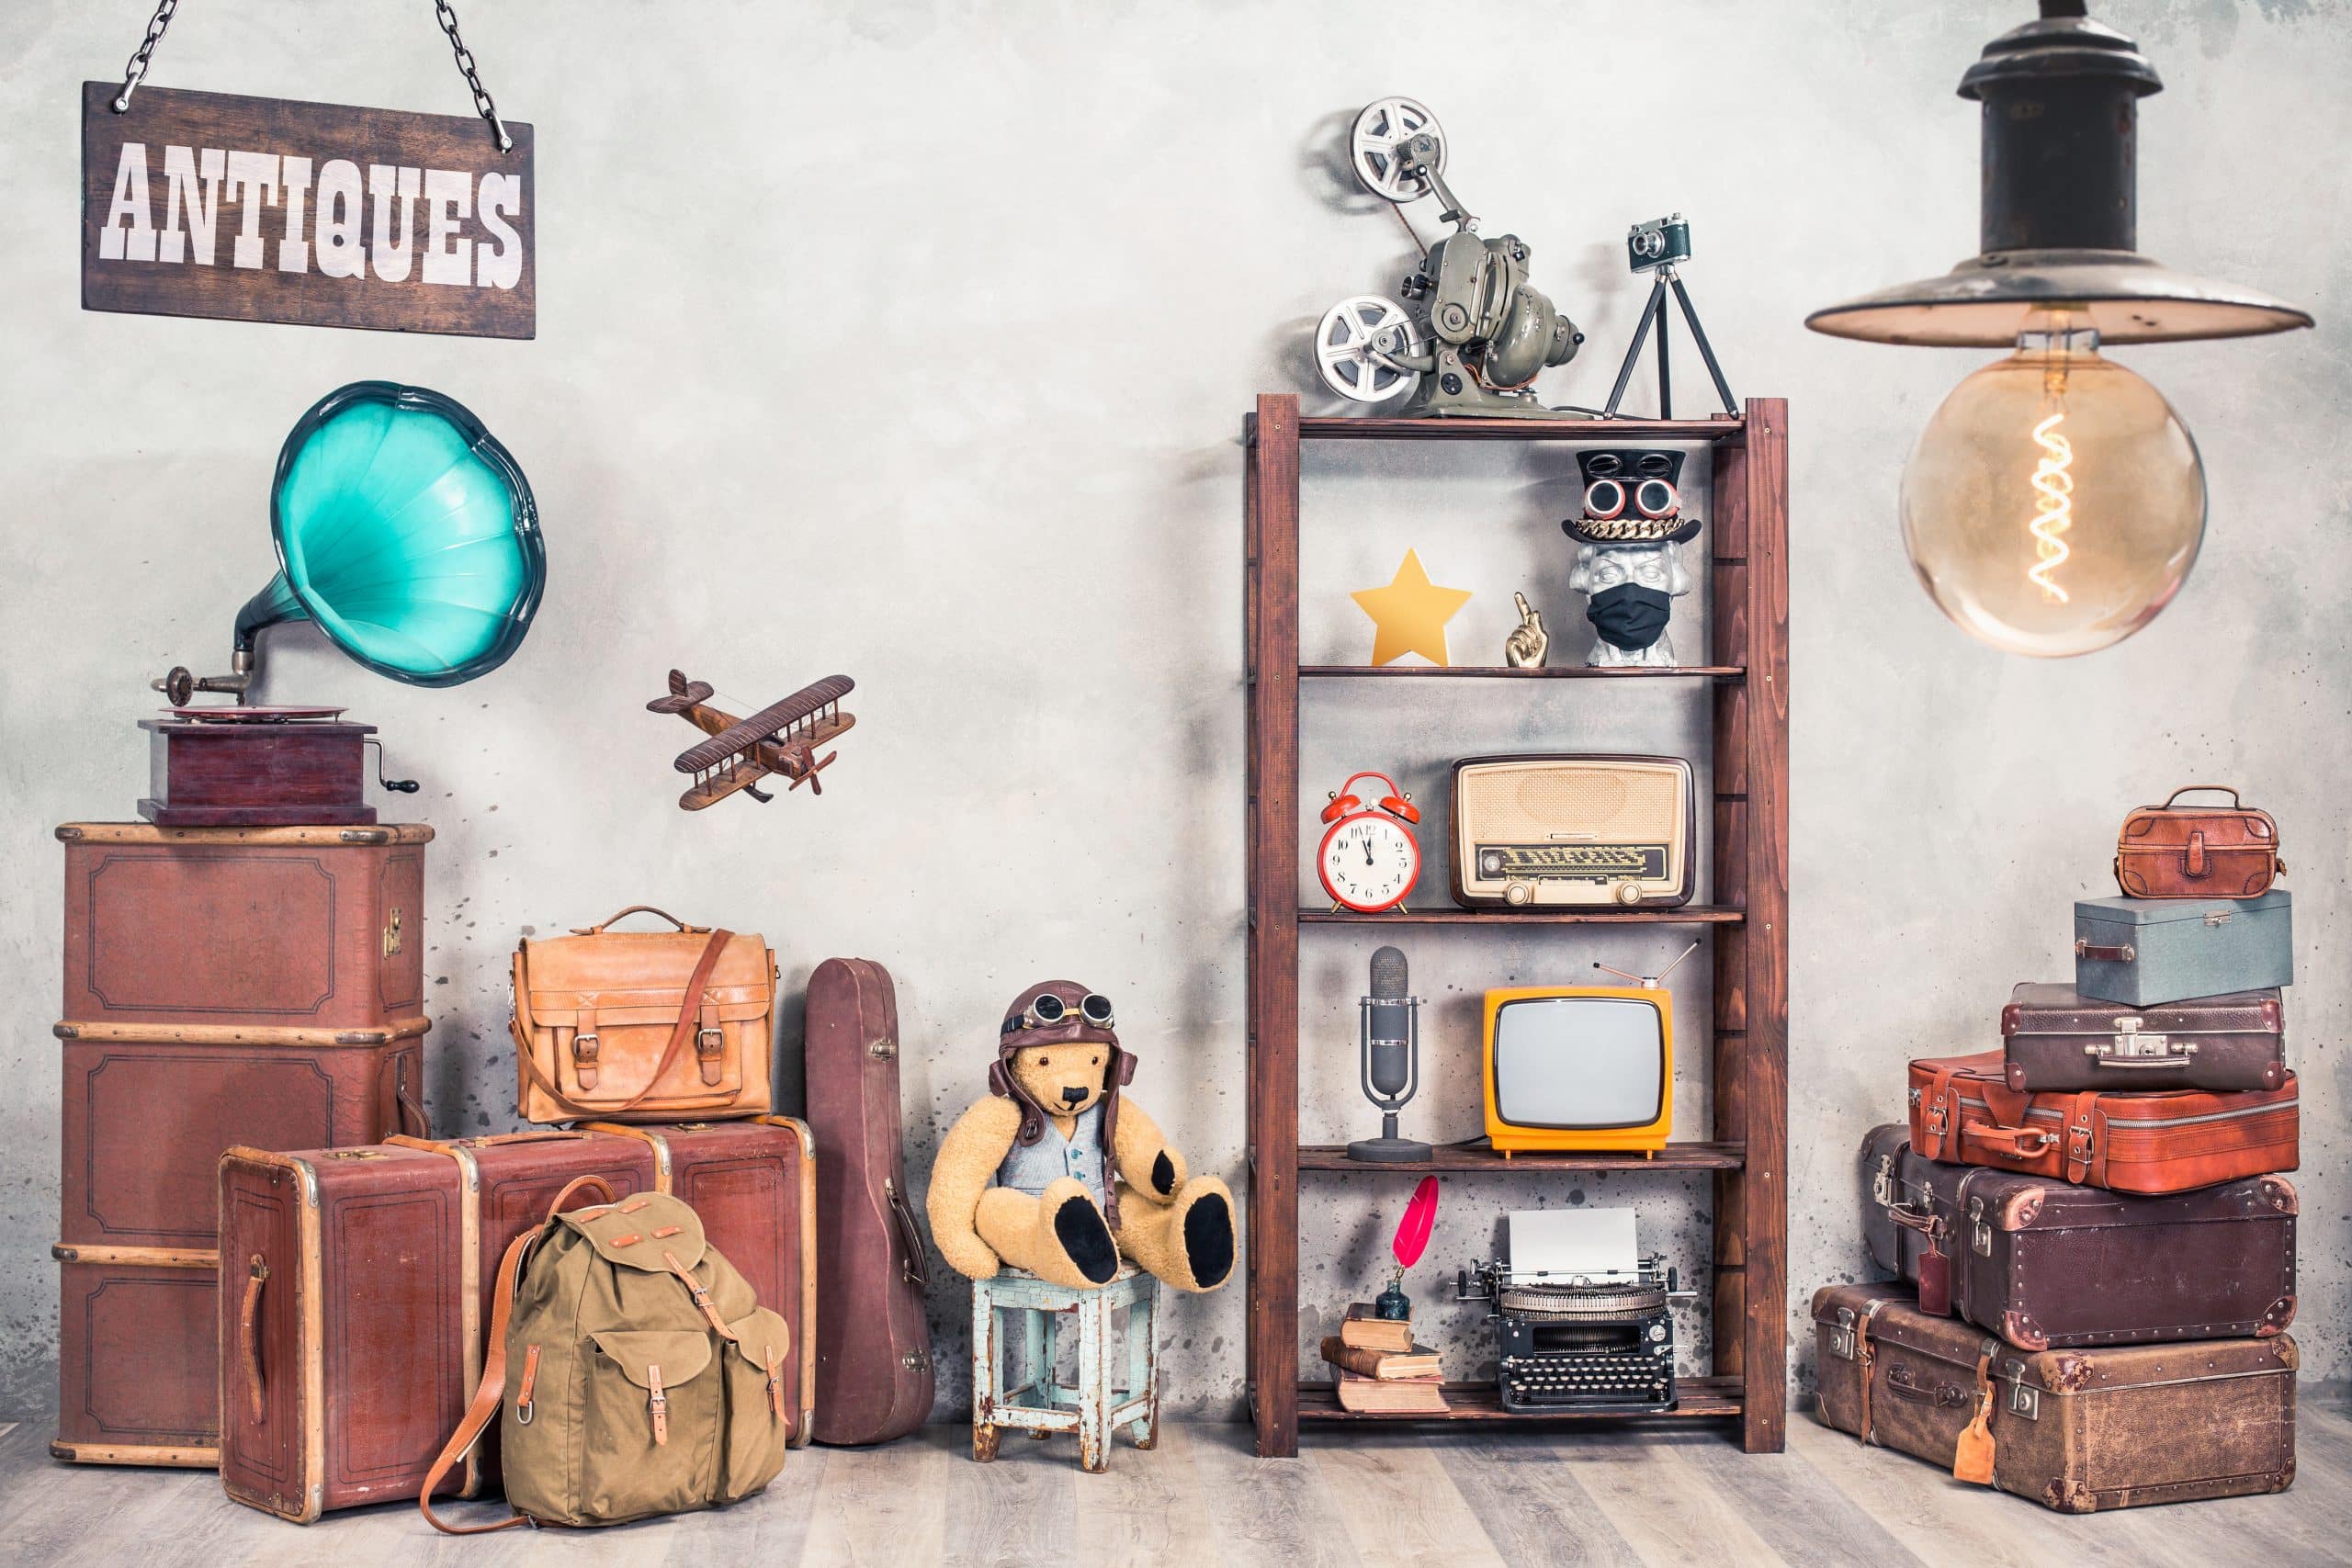 Storage in Newbury: image shows a storage room filled with collectables including a teddy, shelves with clocks and typewriters and an antiques sign